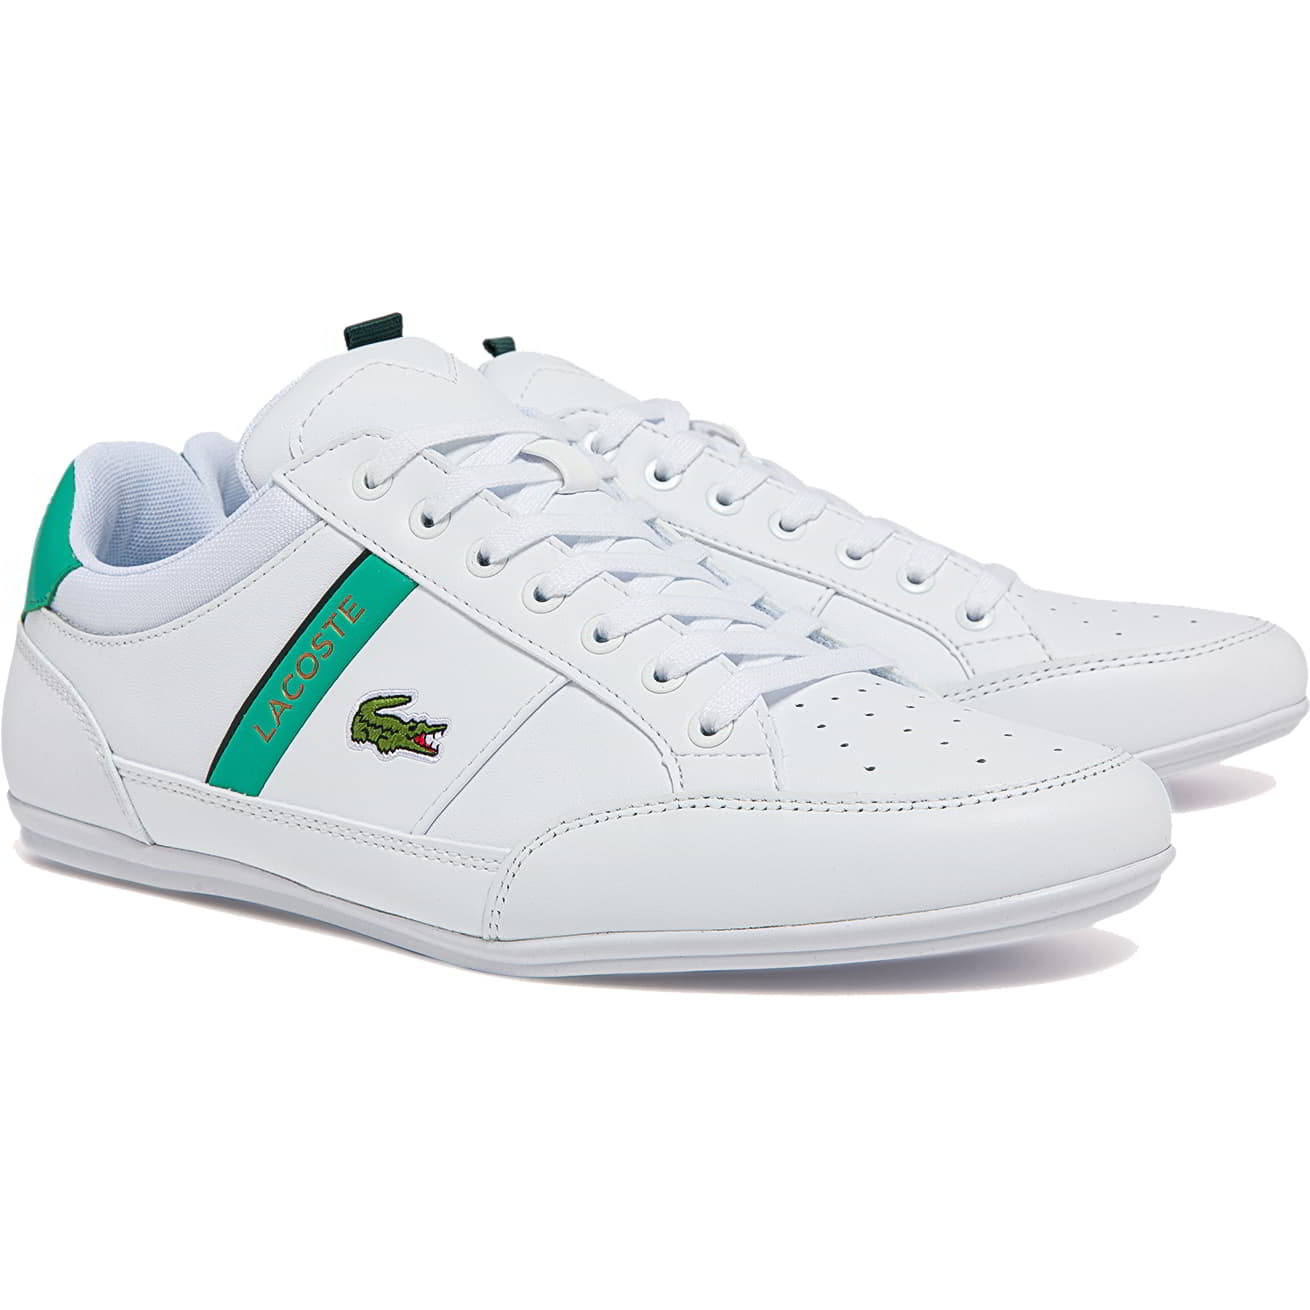 Lacoste Mens Chaymon 722-1 Leather Trainers - UK 7 White 2951